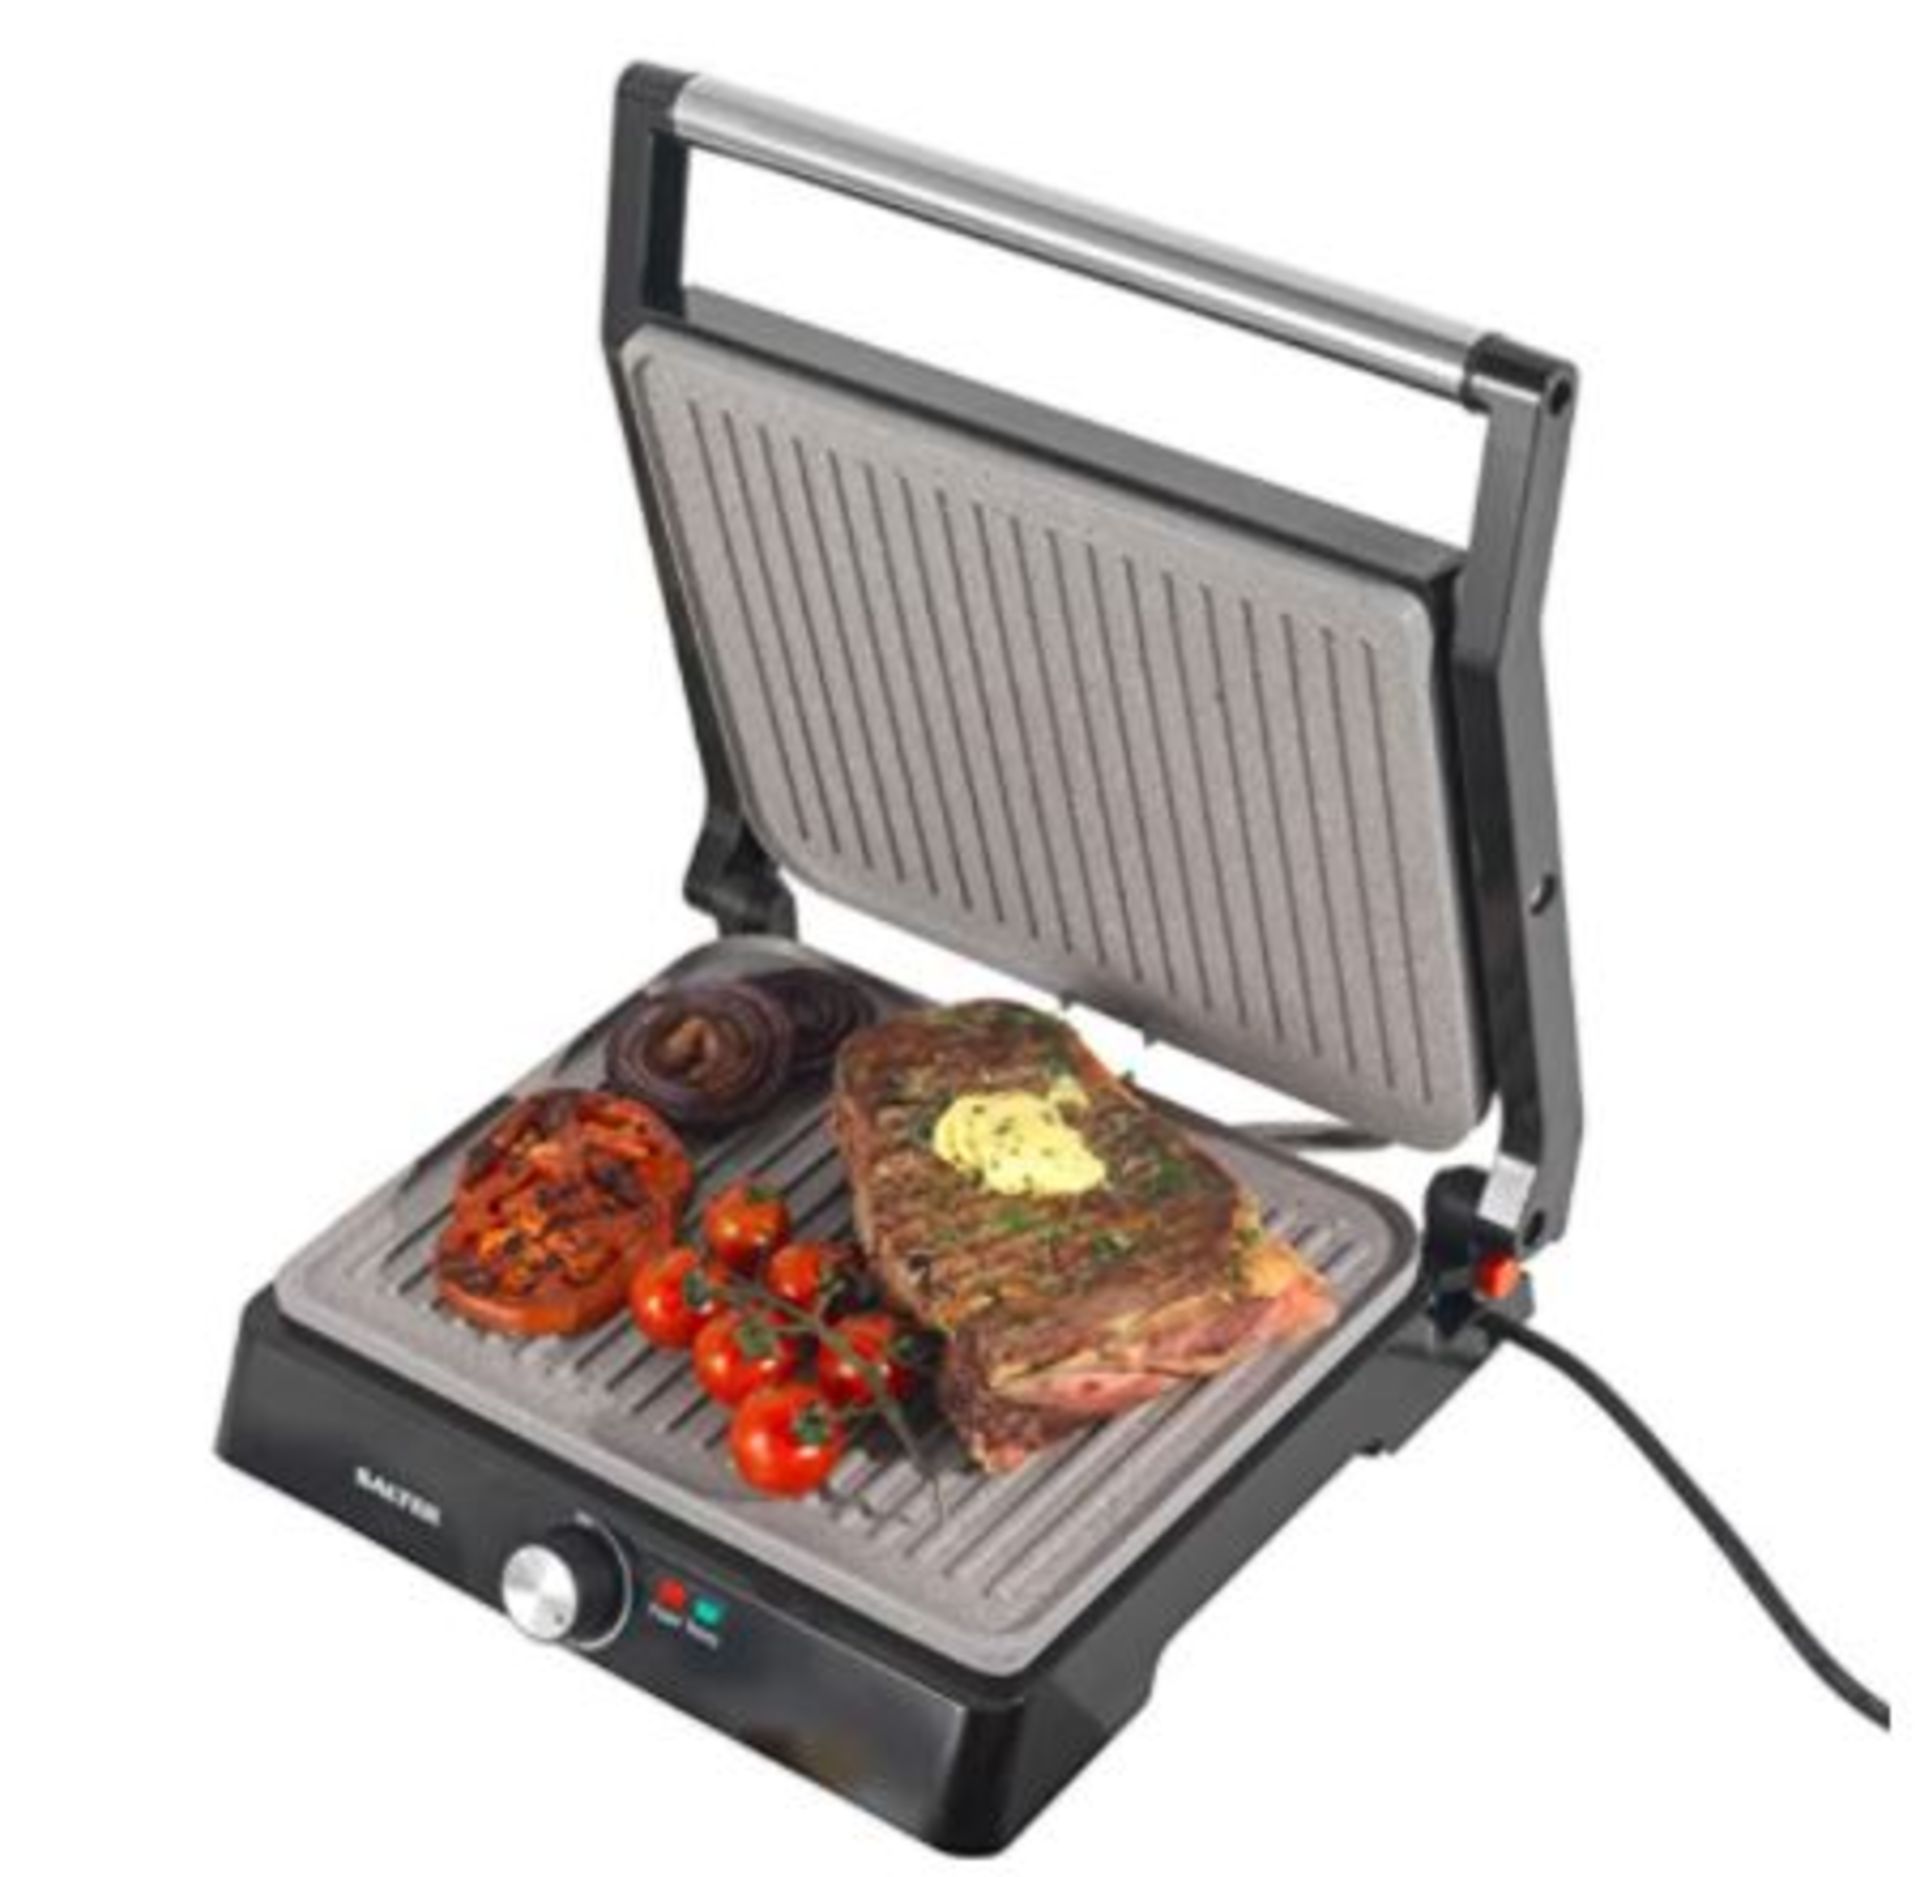 (R6B) Kitchen. 1 X Salter Marble Stone Health Grill & Panini Maker (New – Damaged Packaging)